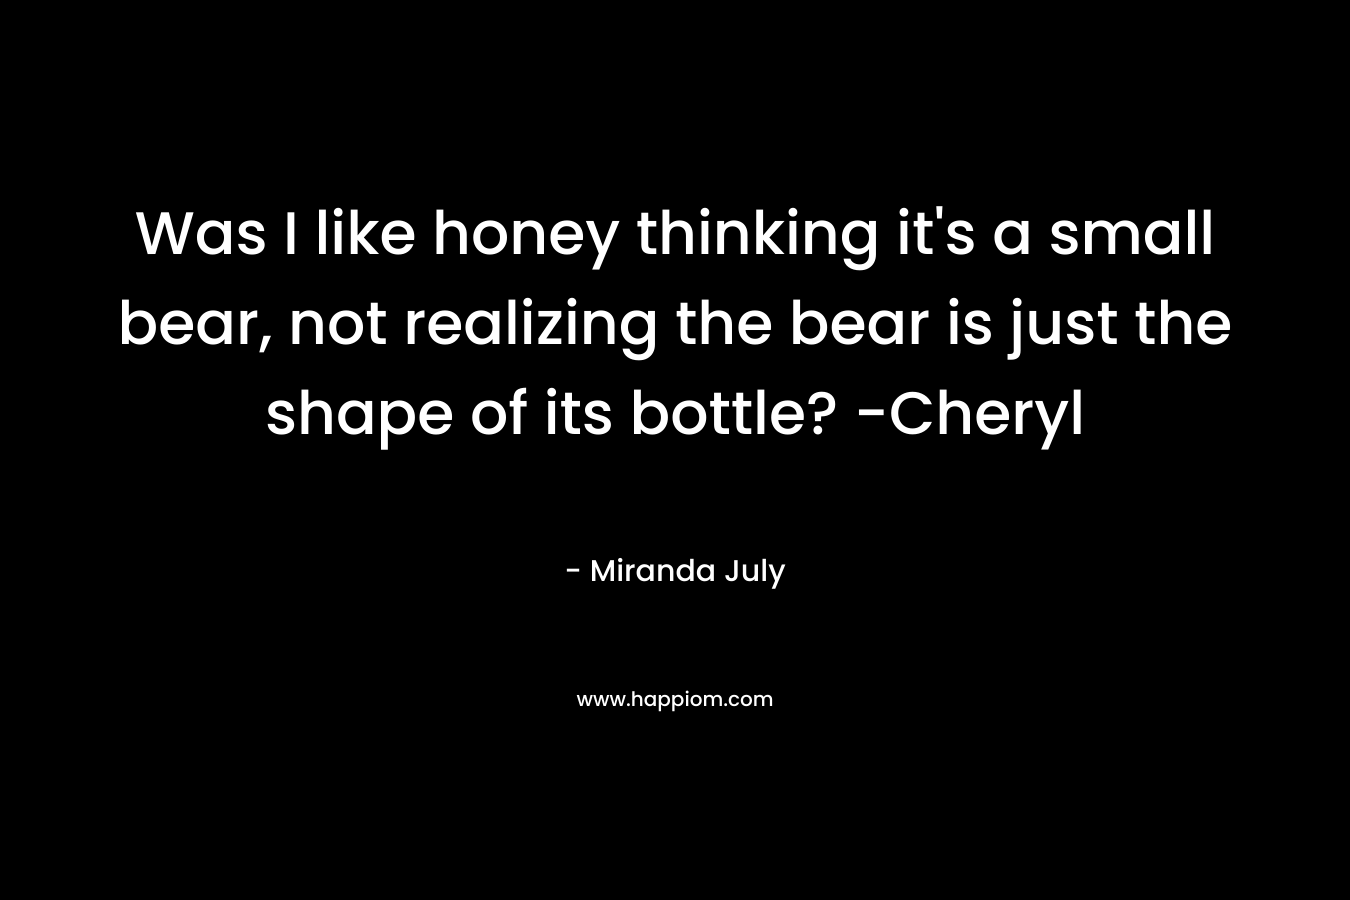 Was I like honey thinking it's a small bear, not realizing the bear is just the shape of its bottle? -Cheryl